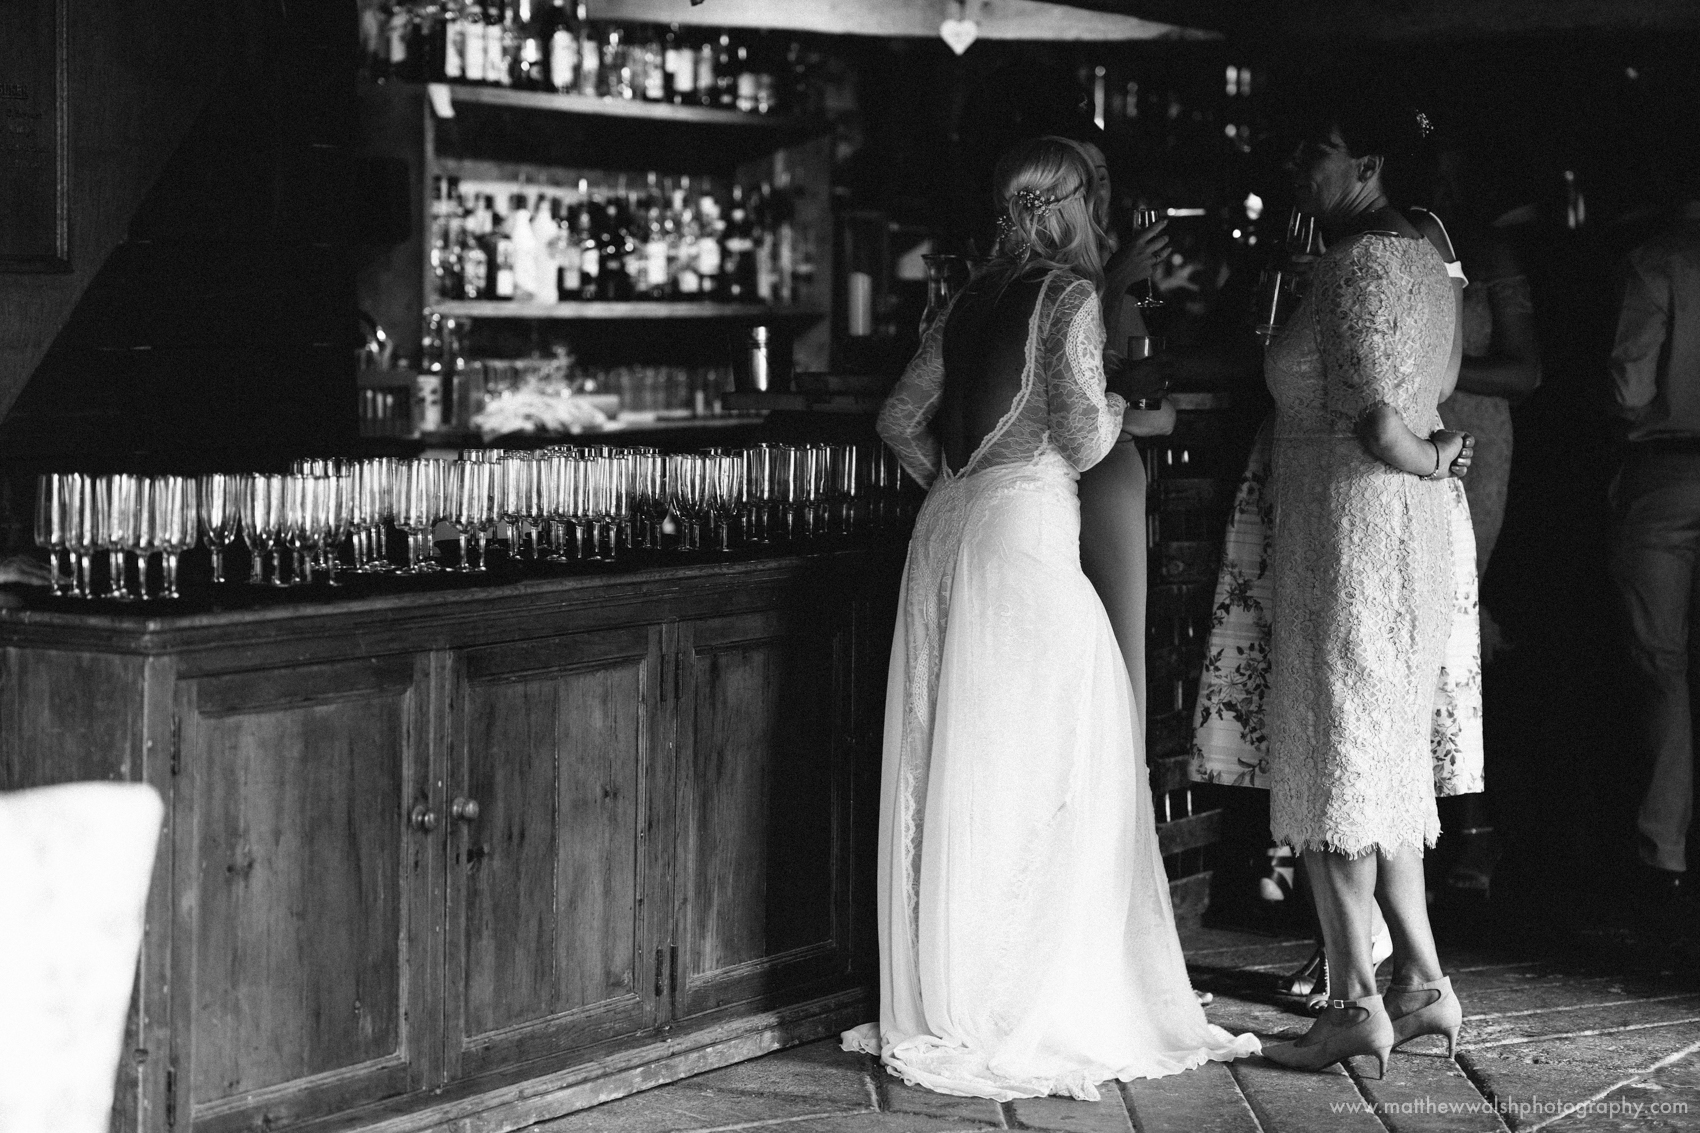 The bride standing next to the glasses ready for the Prosecco to be poured